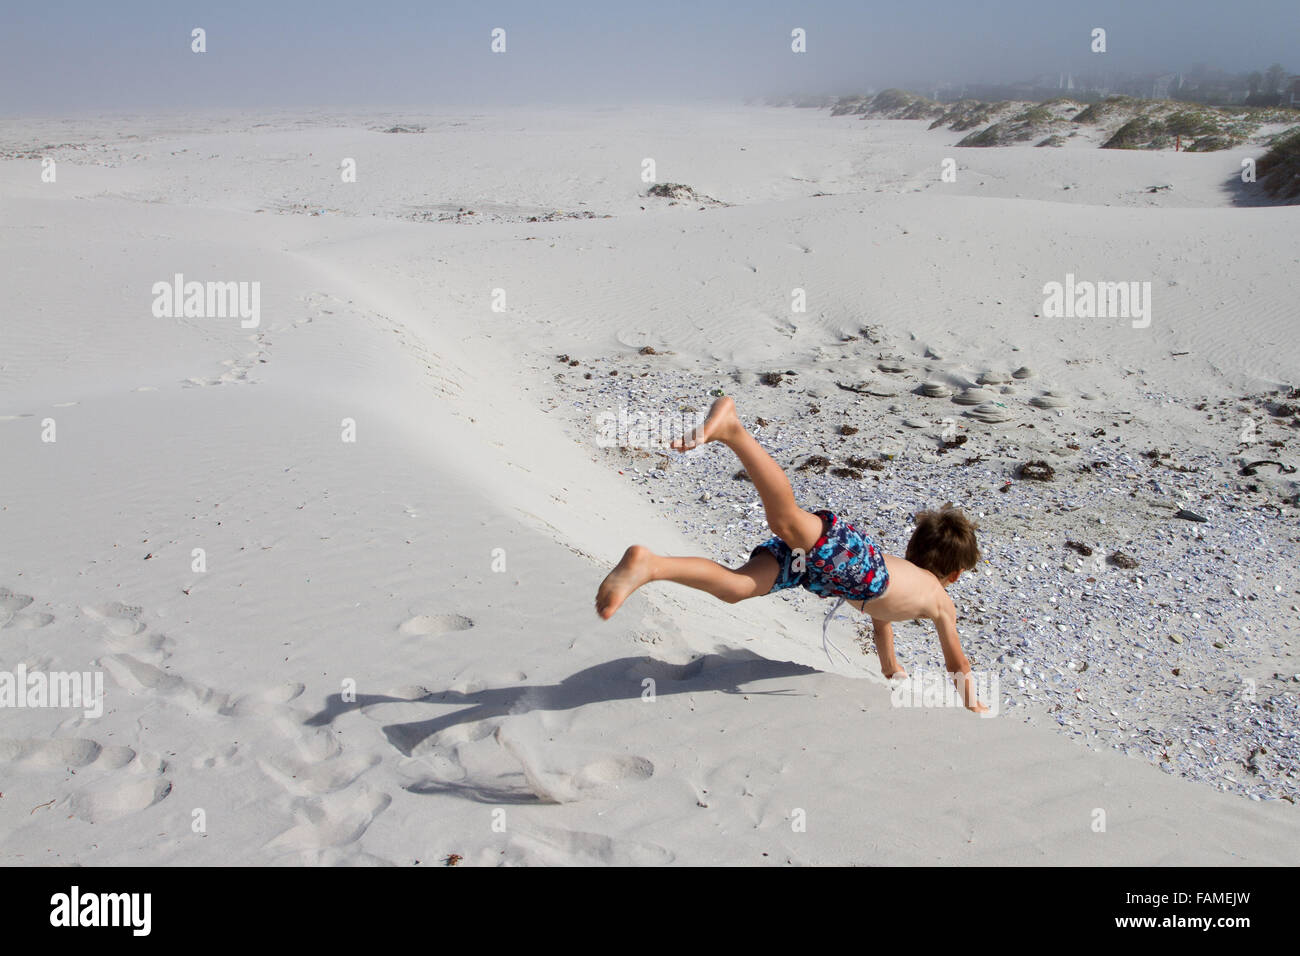 Boy jumps off a sand dune Stock Photo